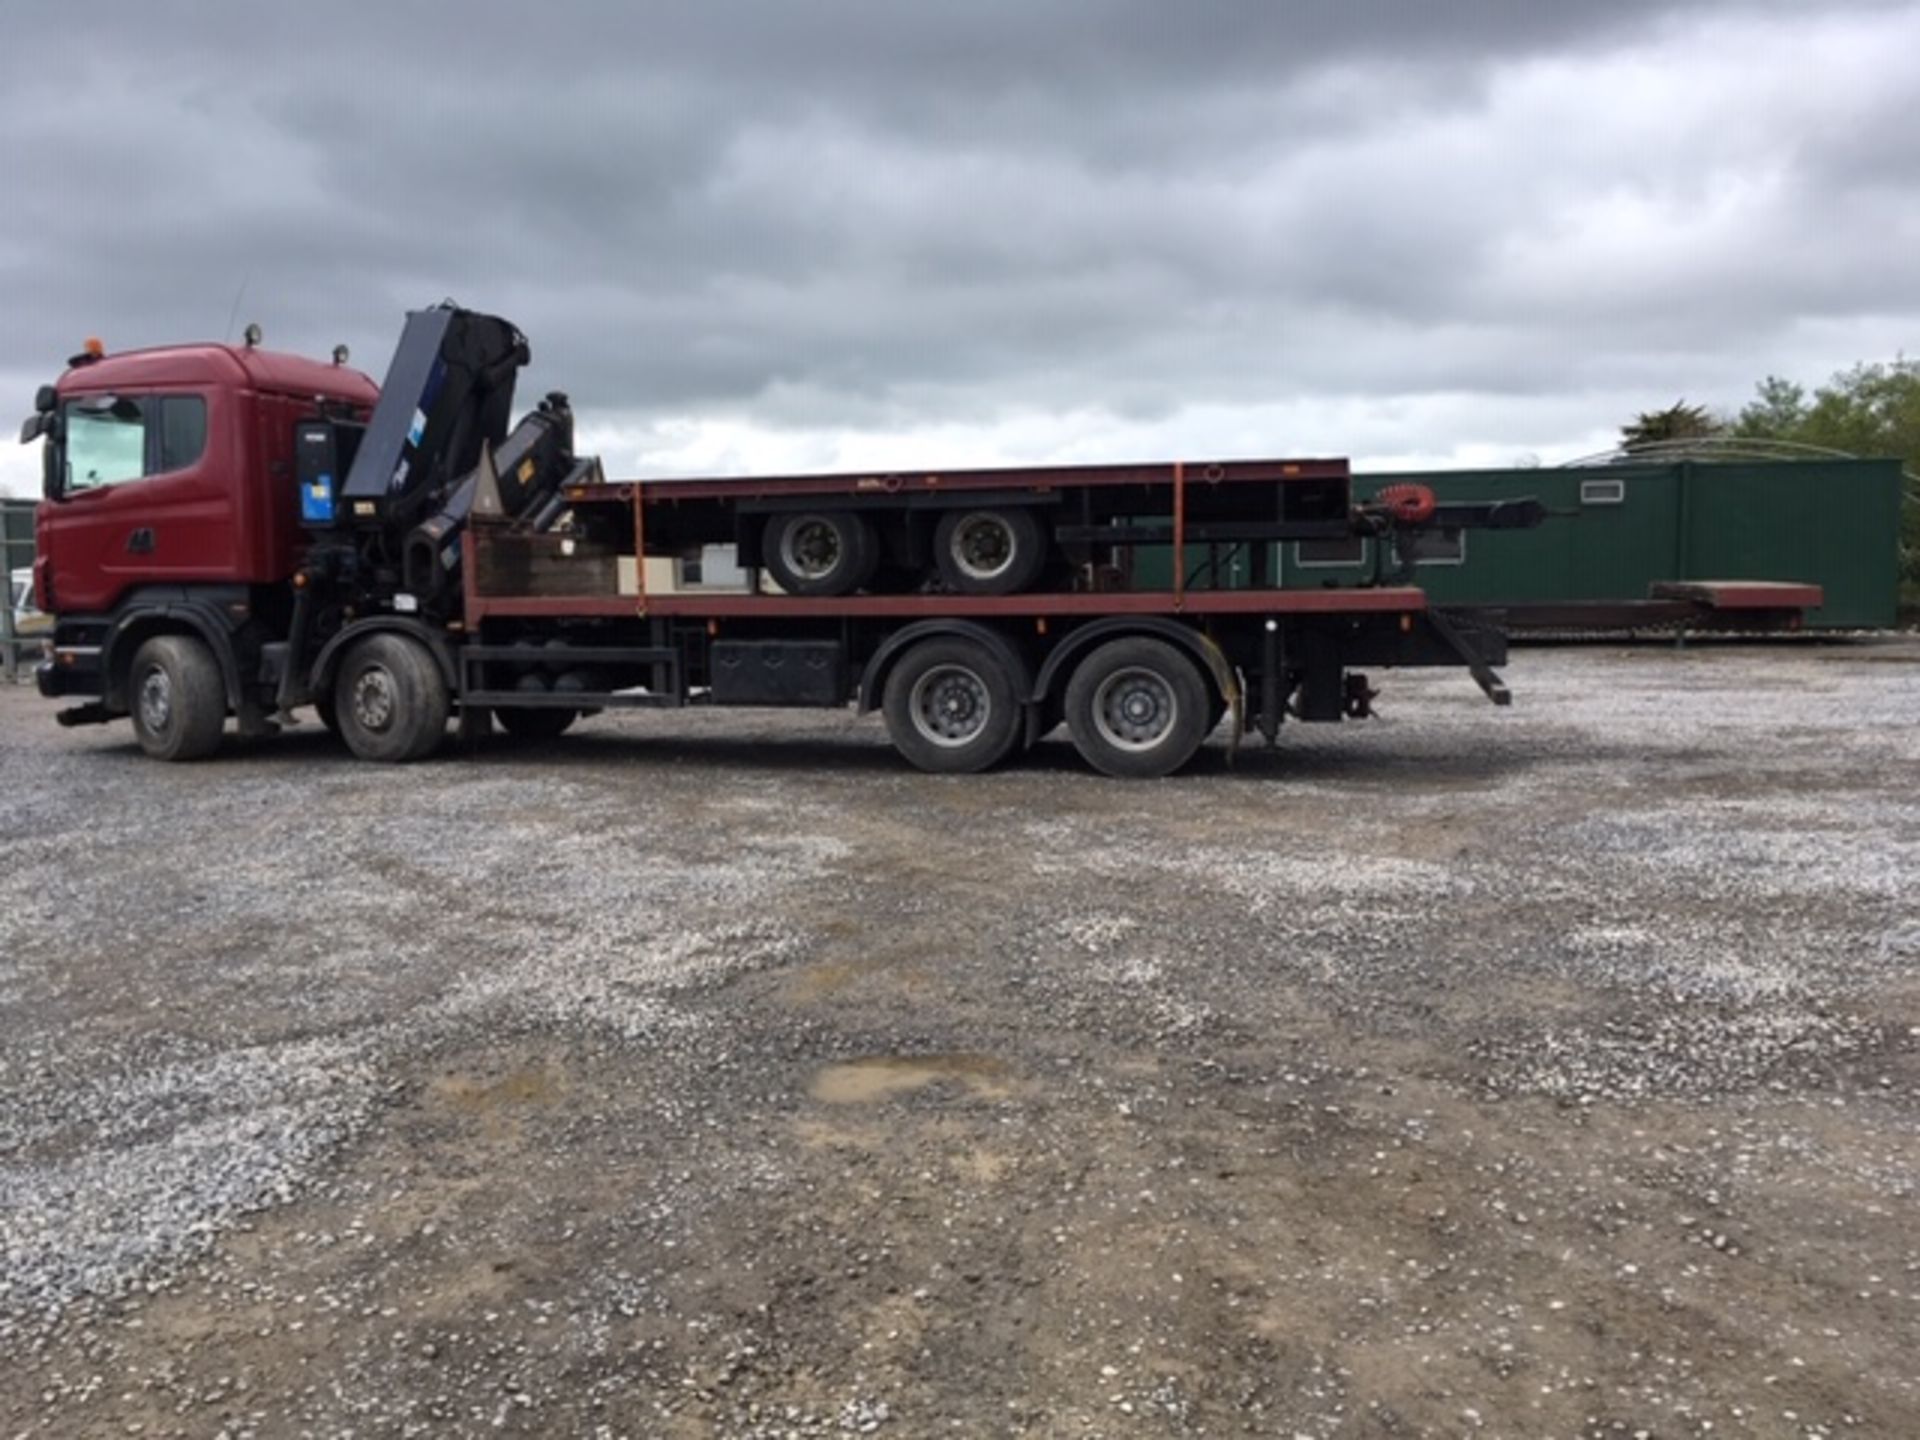 2007 SCANIA R380 8X4 SLEEPERCAB CRANE TRUCK FLATBED COUPLED WITH 20FT TWIN AXLE MC AULEY TRAILER - Image 9 of 22